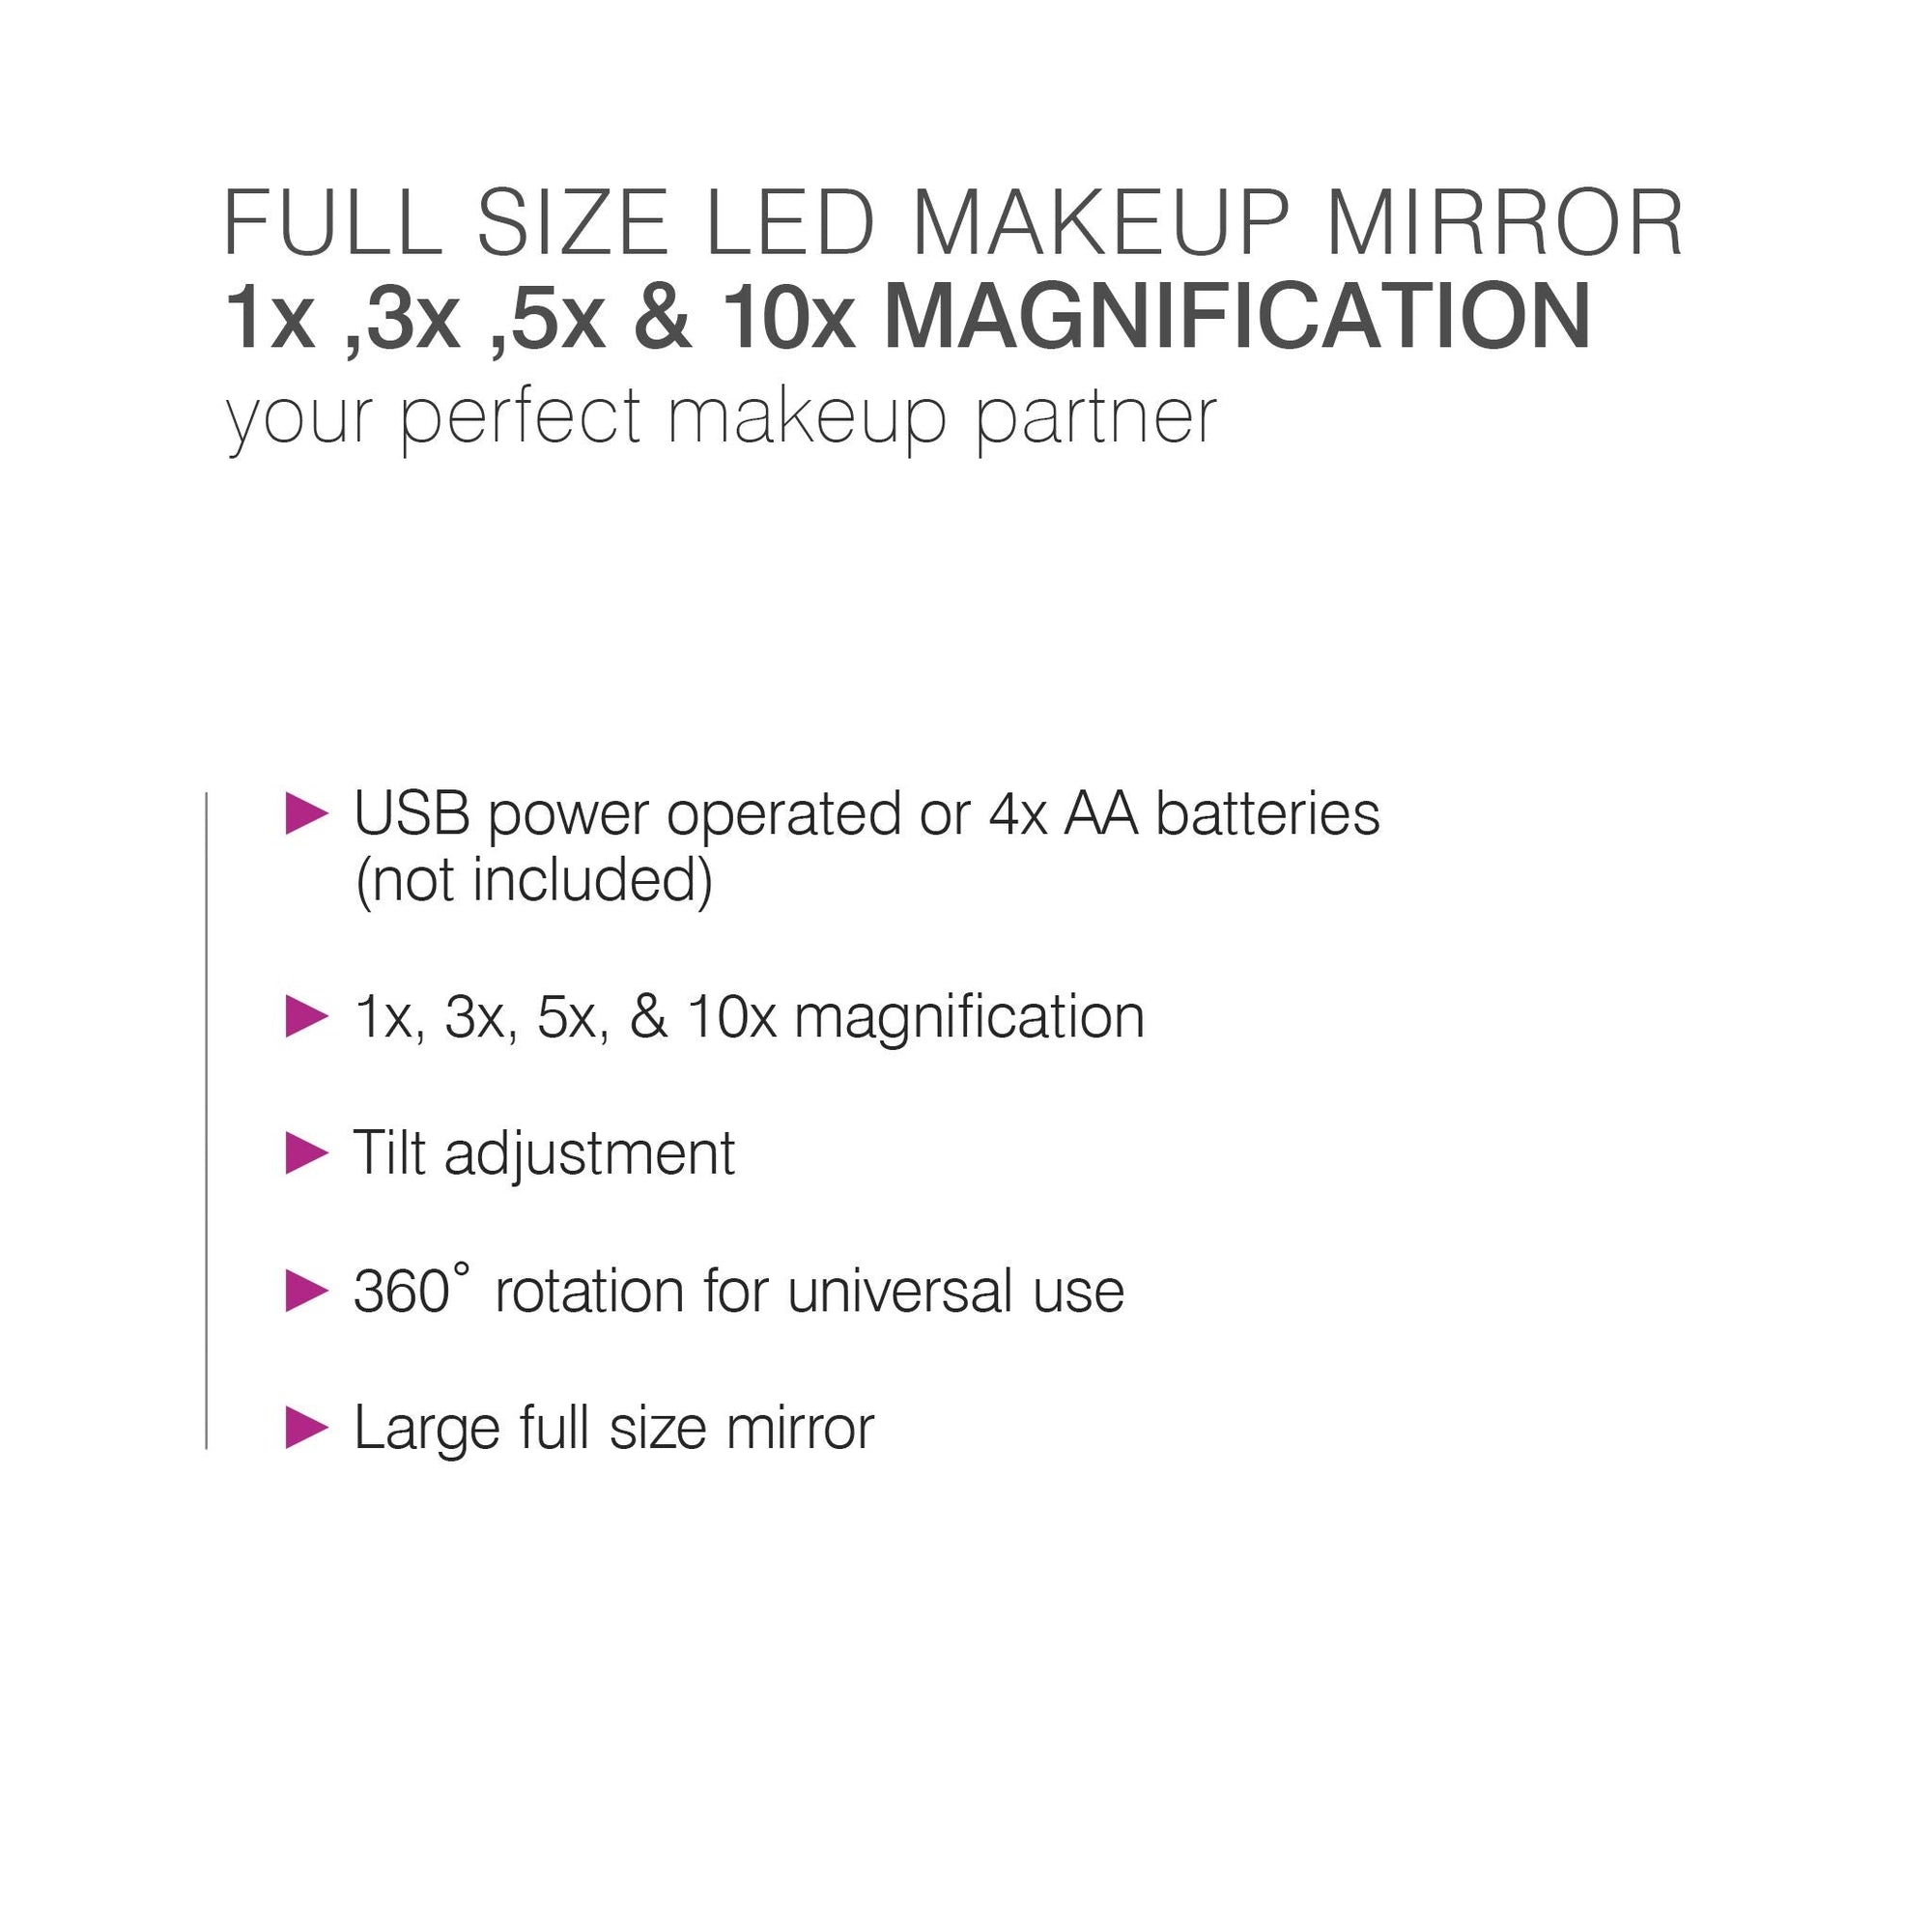 bulleted text listing features of full size LED make up mirror USB power operated or 4 x AA batteries 1x 3x 5x 10x magnification tilt adjustment 360 degree rotation for universal use large full size mirror